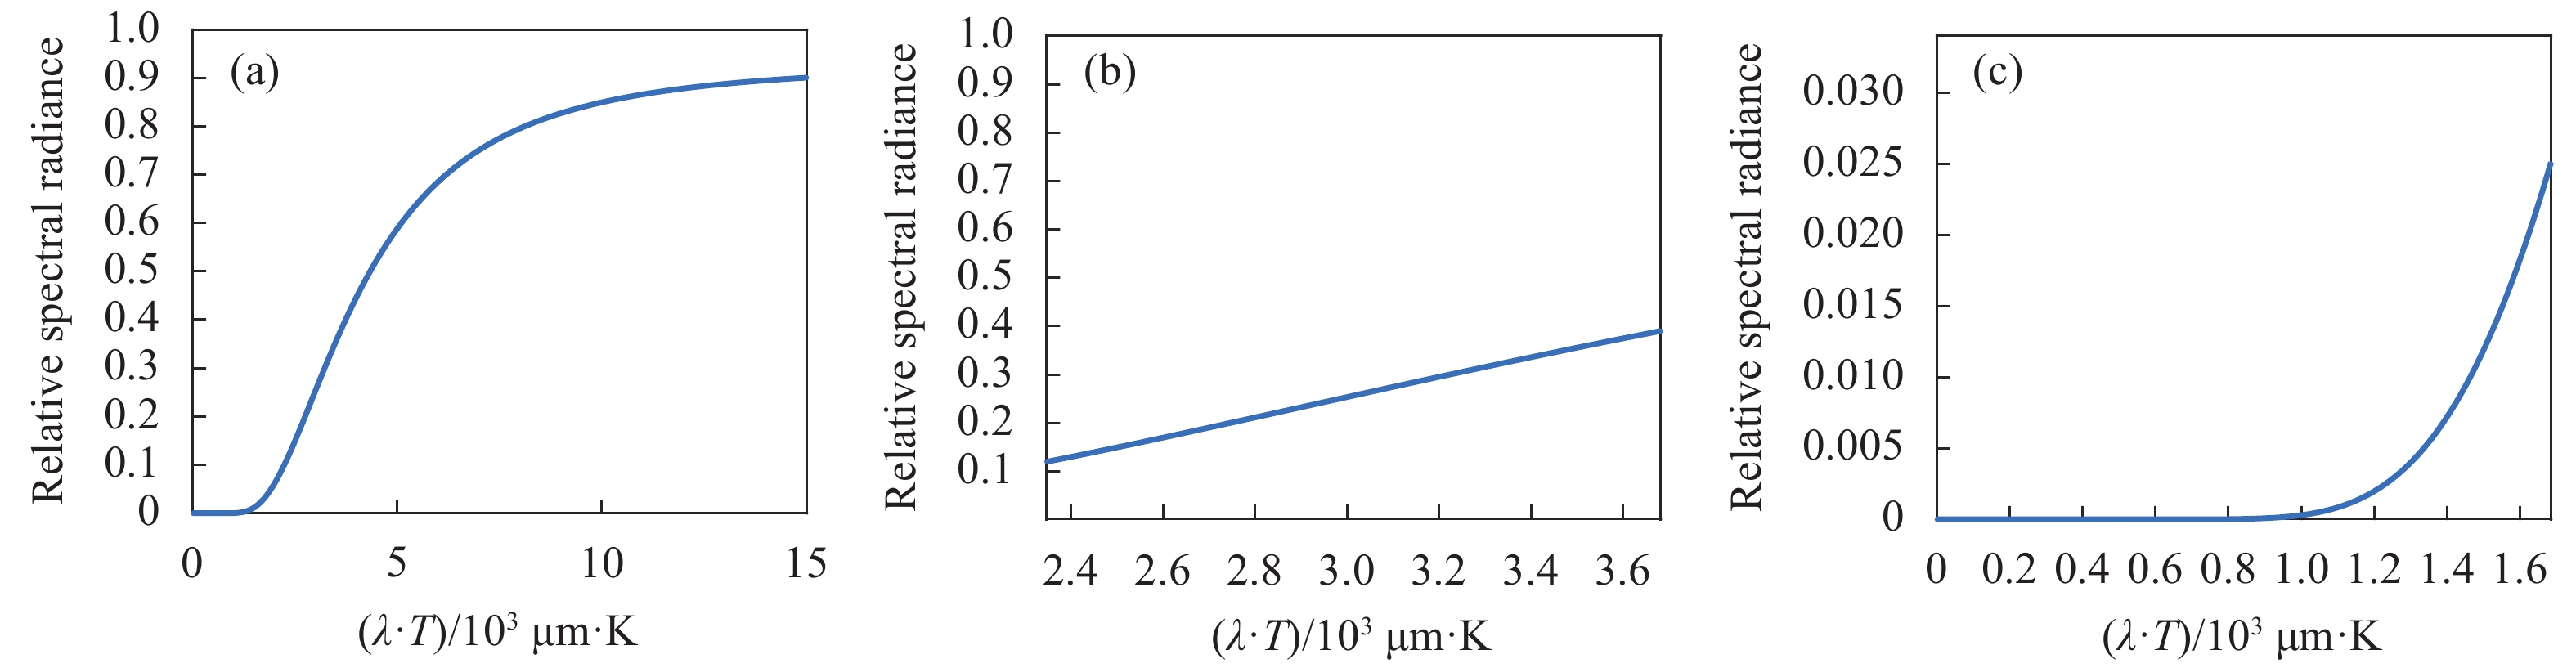 Graph of relative radiant exitance function of black-body when takes different ranges. (a) takes entire range; (b) takes 2.4×103-3.6×103μm·K ; (c) takes 0-1.5×103μm·K取不同范围时黑体相对辐出度函数图。(a) 取全部范围；(b) 取2.4×103~3.6×103μm·K；(c) 取